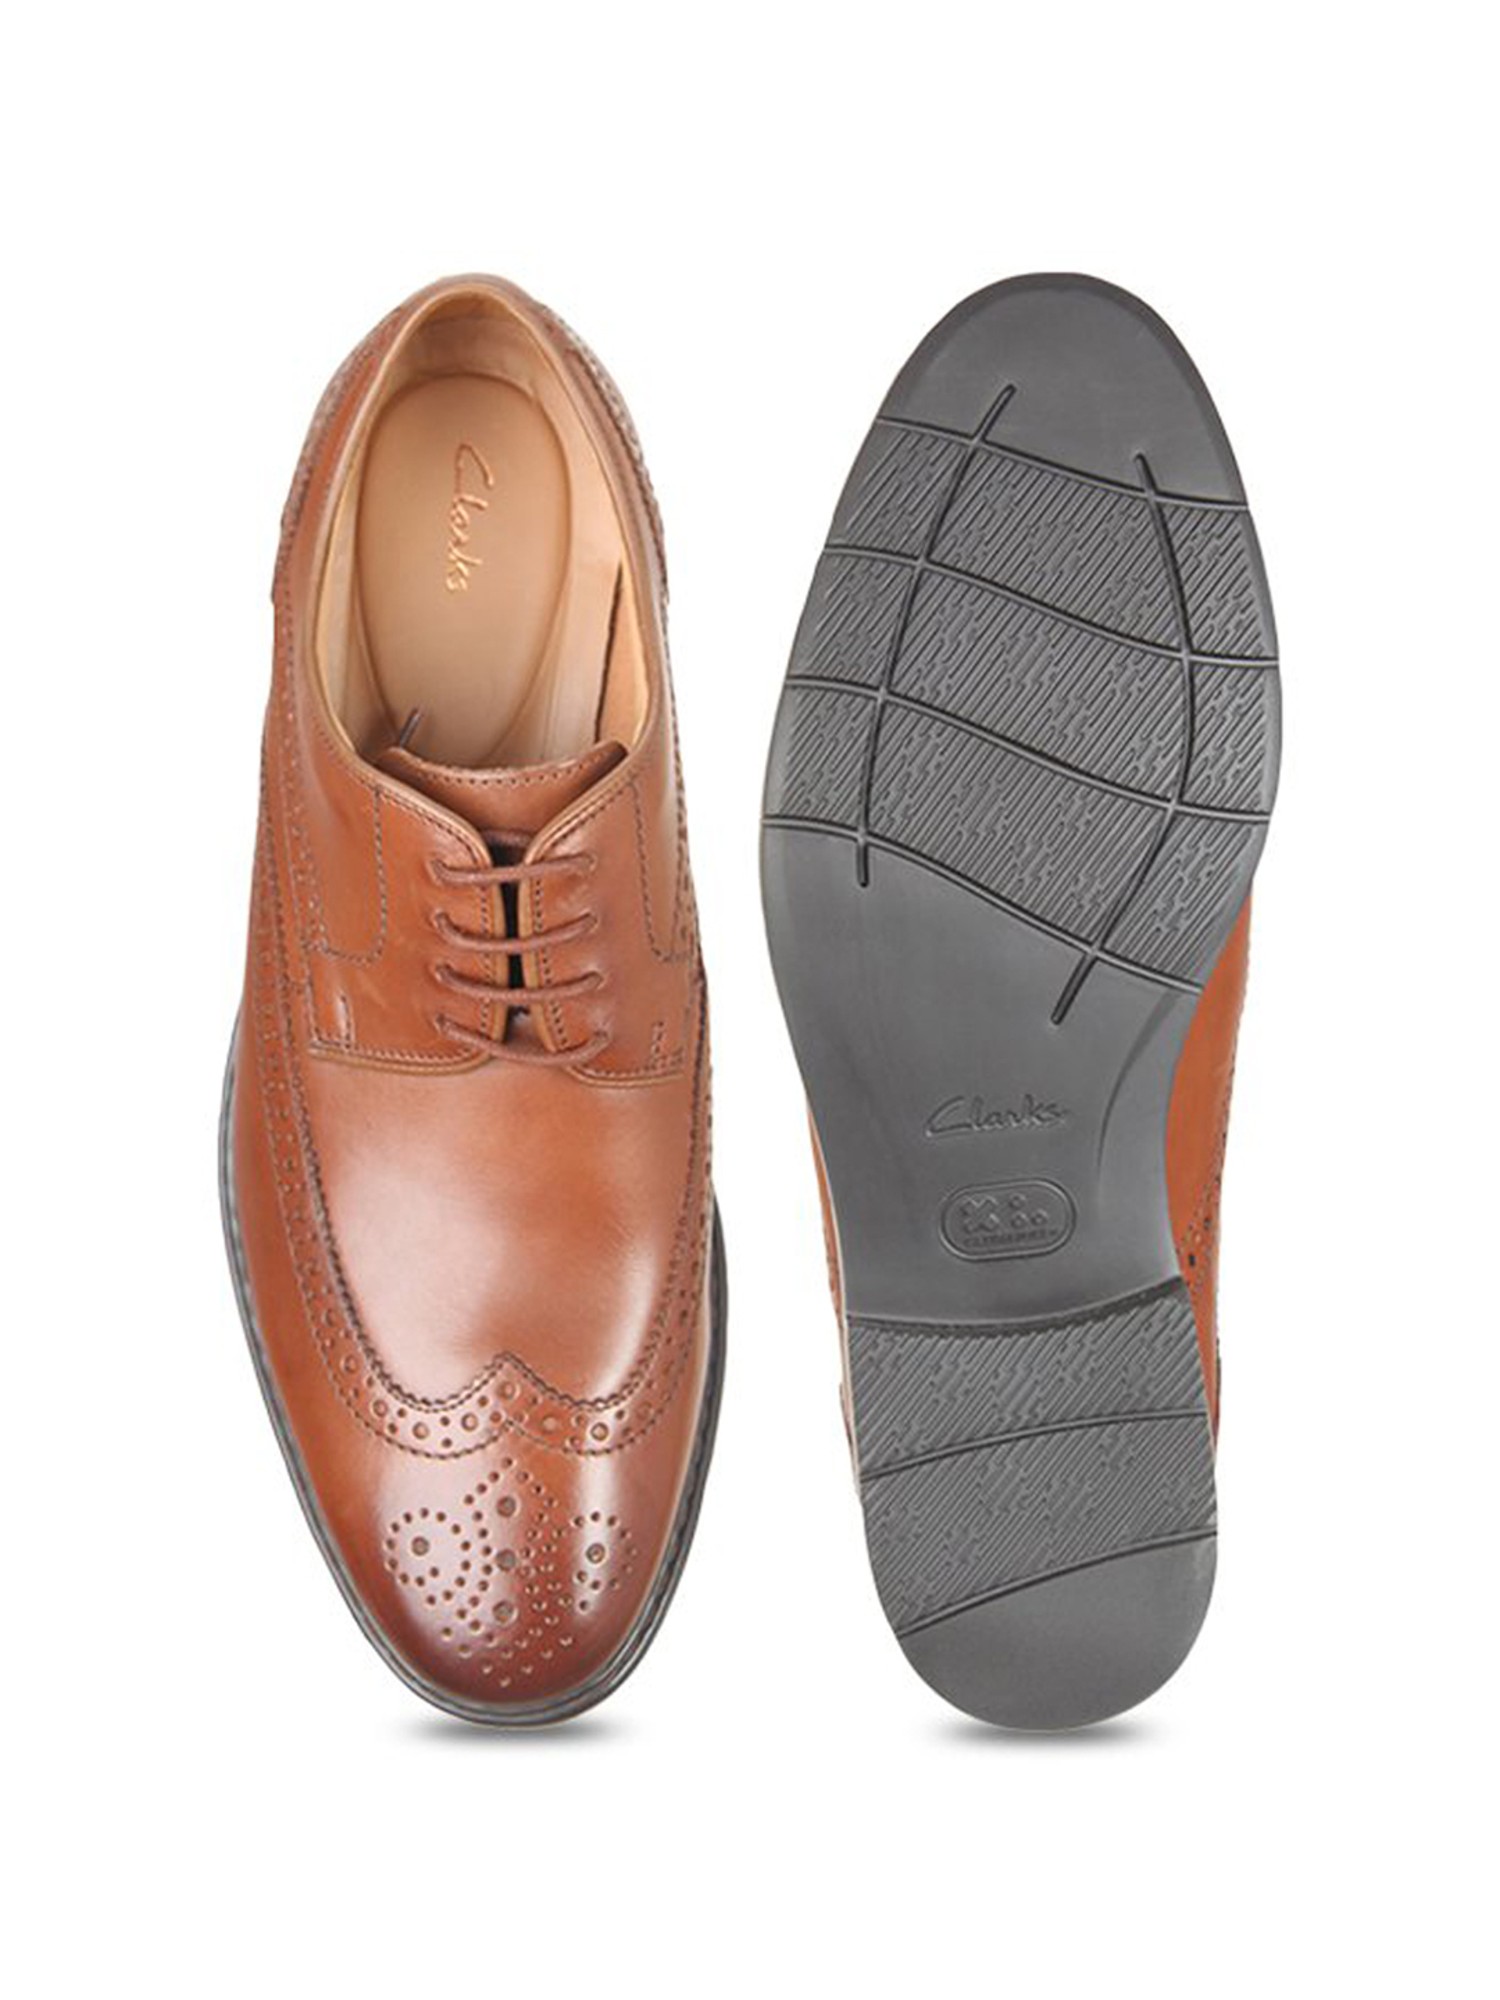 Buy Clarks Limit Brogue for Men at Best Price @ Tata CLiQ